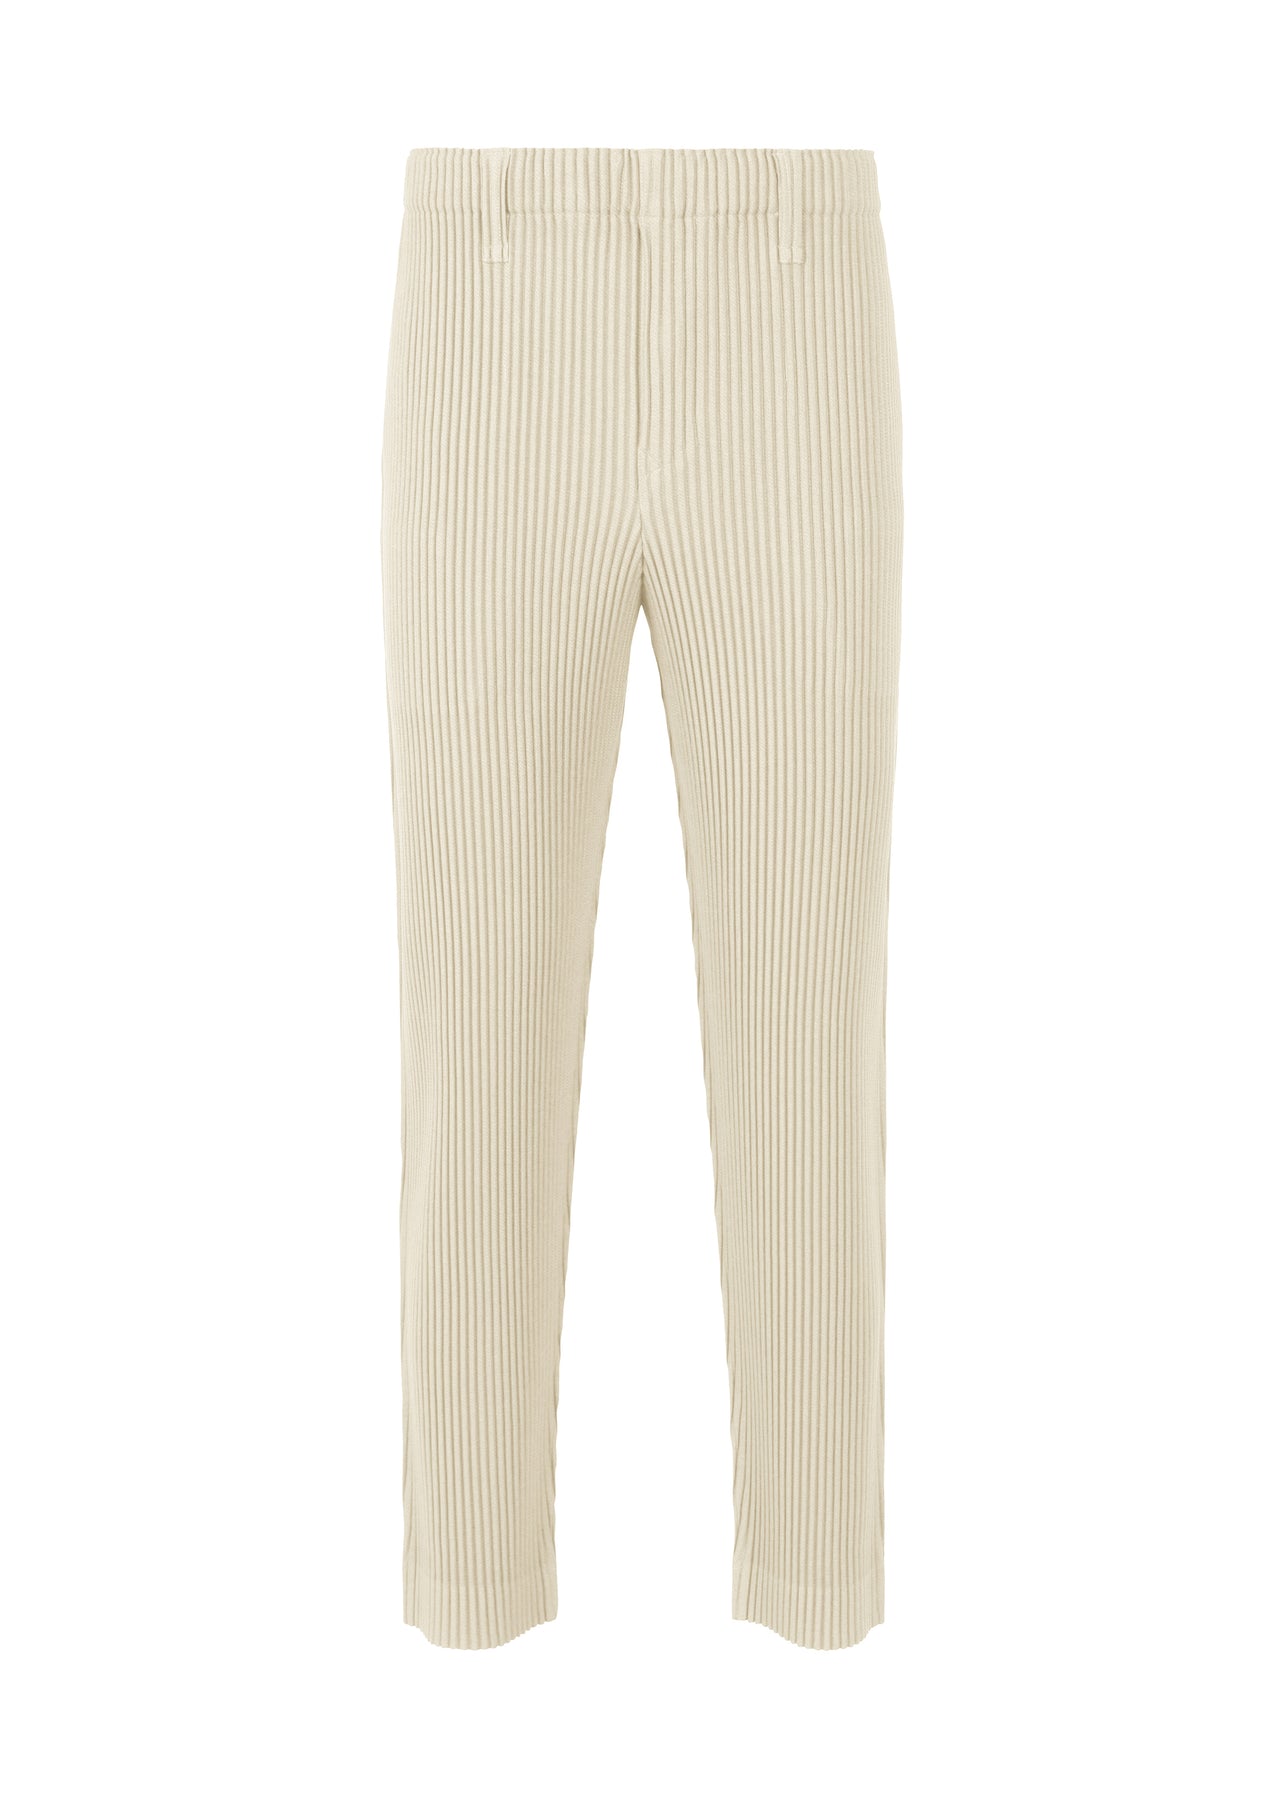 KERSEY PLEATS PANTS | The official ISSEY MIYAKE ONLINE STORE